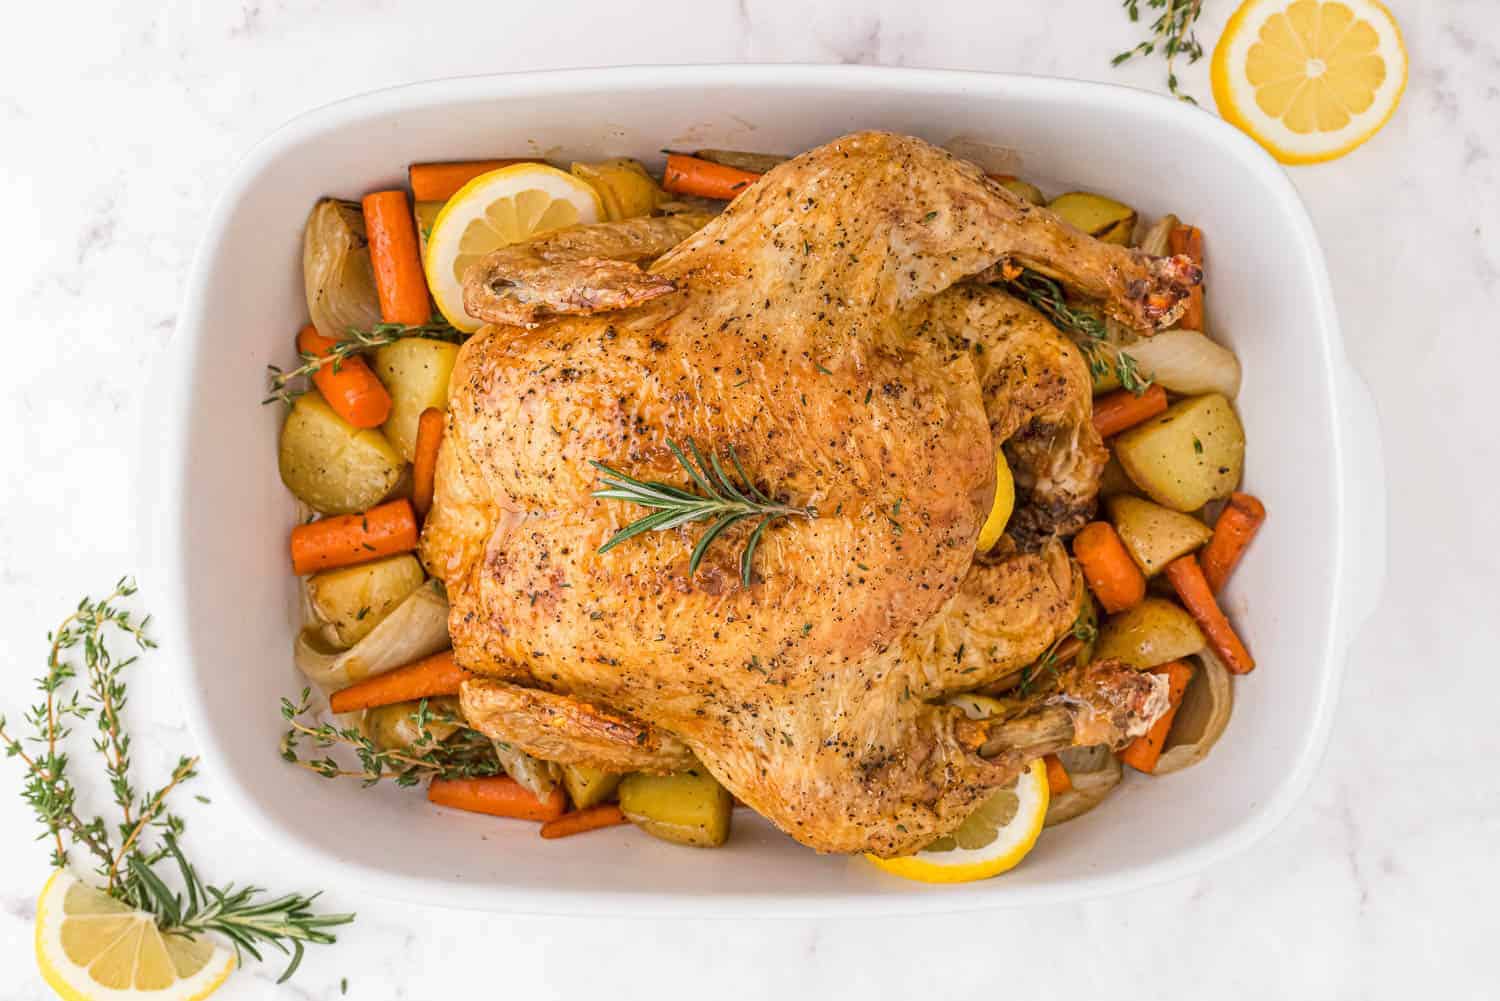 Roasted whole chicken on top of roasted vegetables, garnished with herbs.